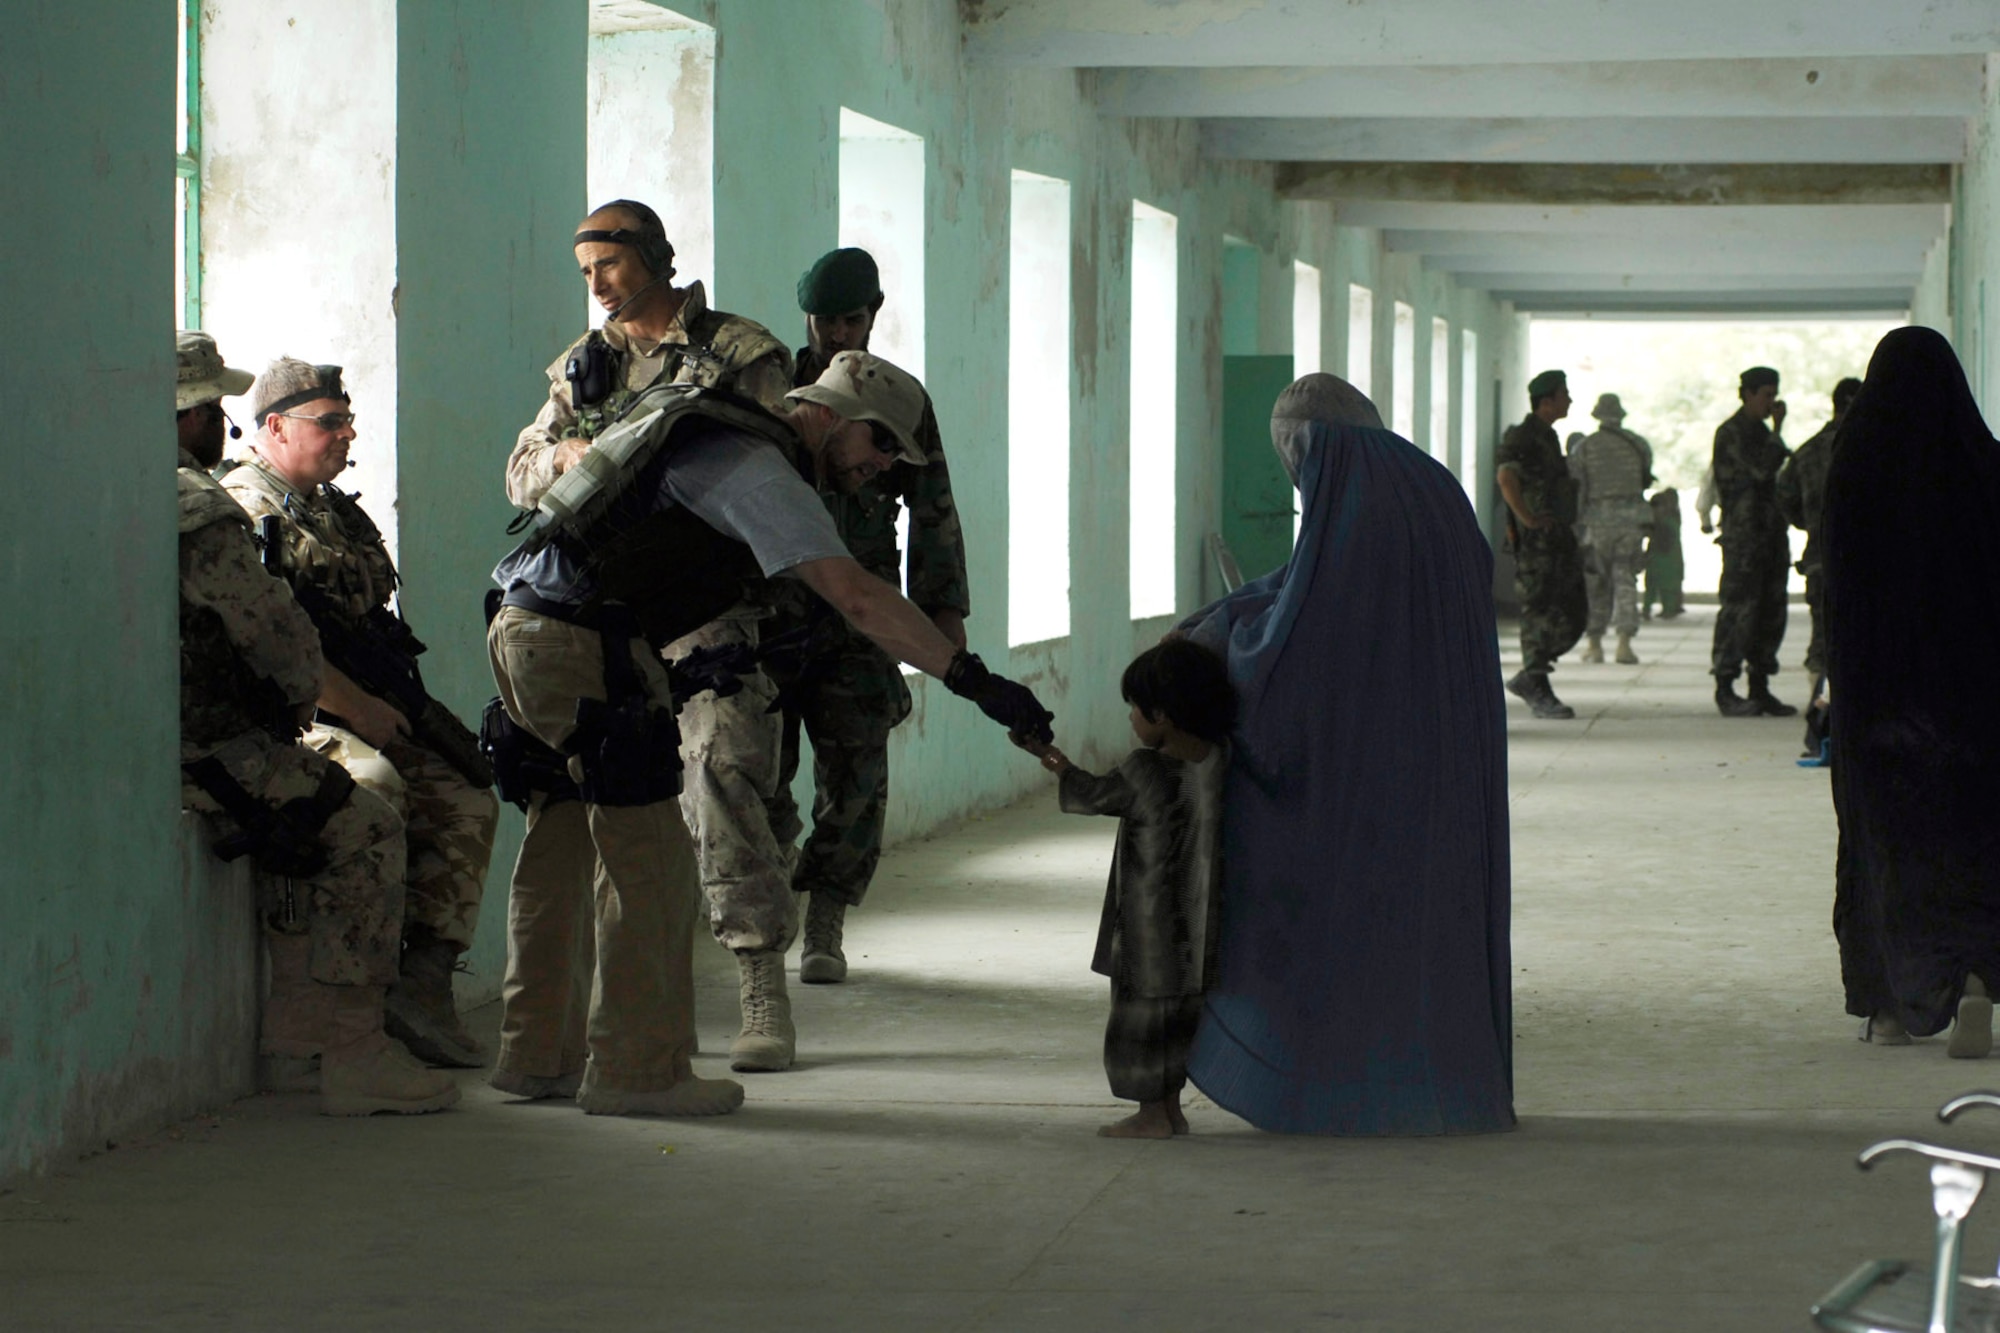 Air Force Office of Special Investigations special agents greet an Afghani child while conducting counter intelligence in Afghanistan. (U.S. Air Force photo)
